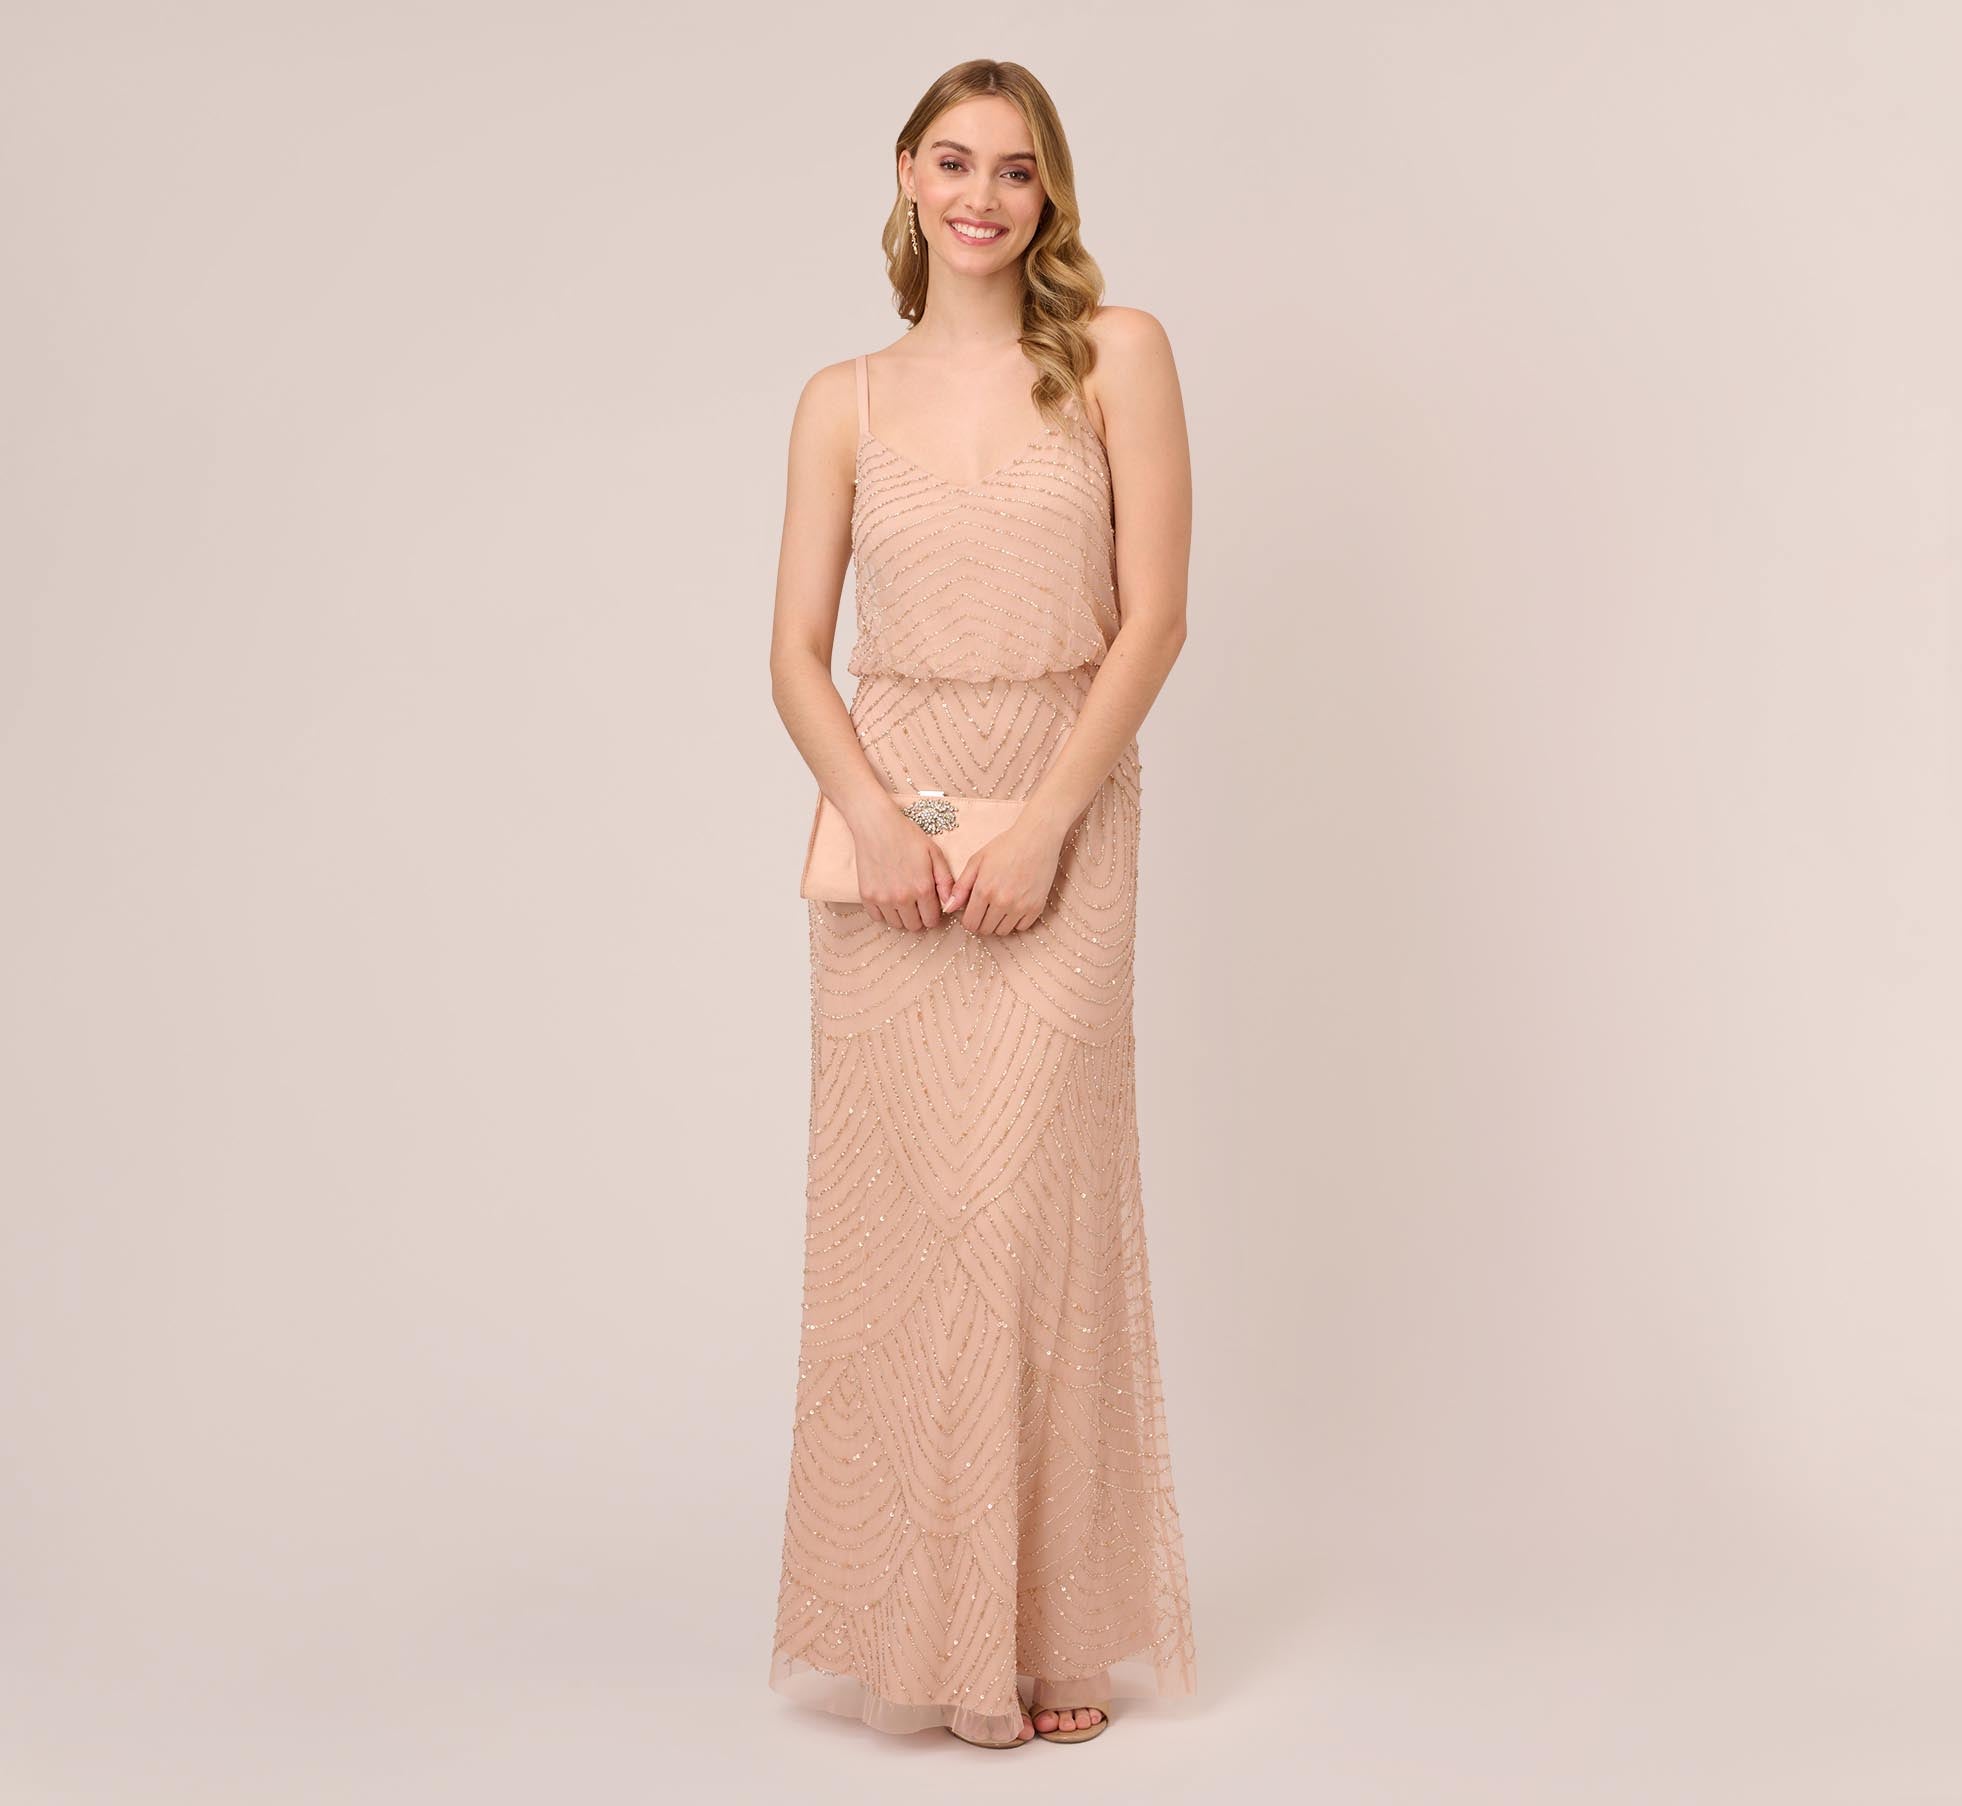 Art Deco Beaded Mermaid Gown With Cowl Neckline In Champagne Gold |  Adrianna Papell